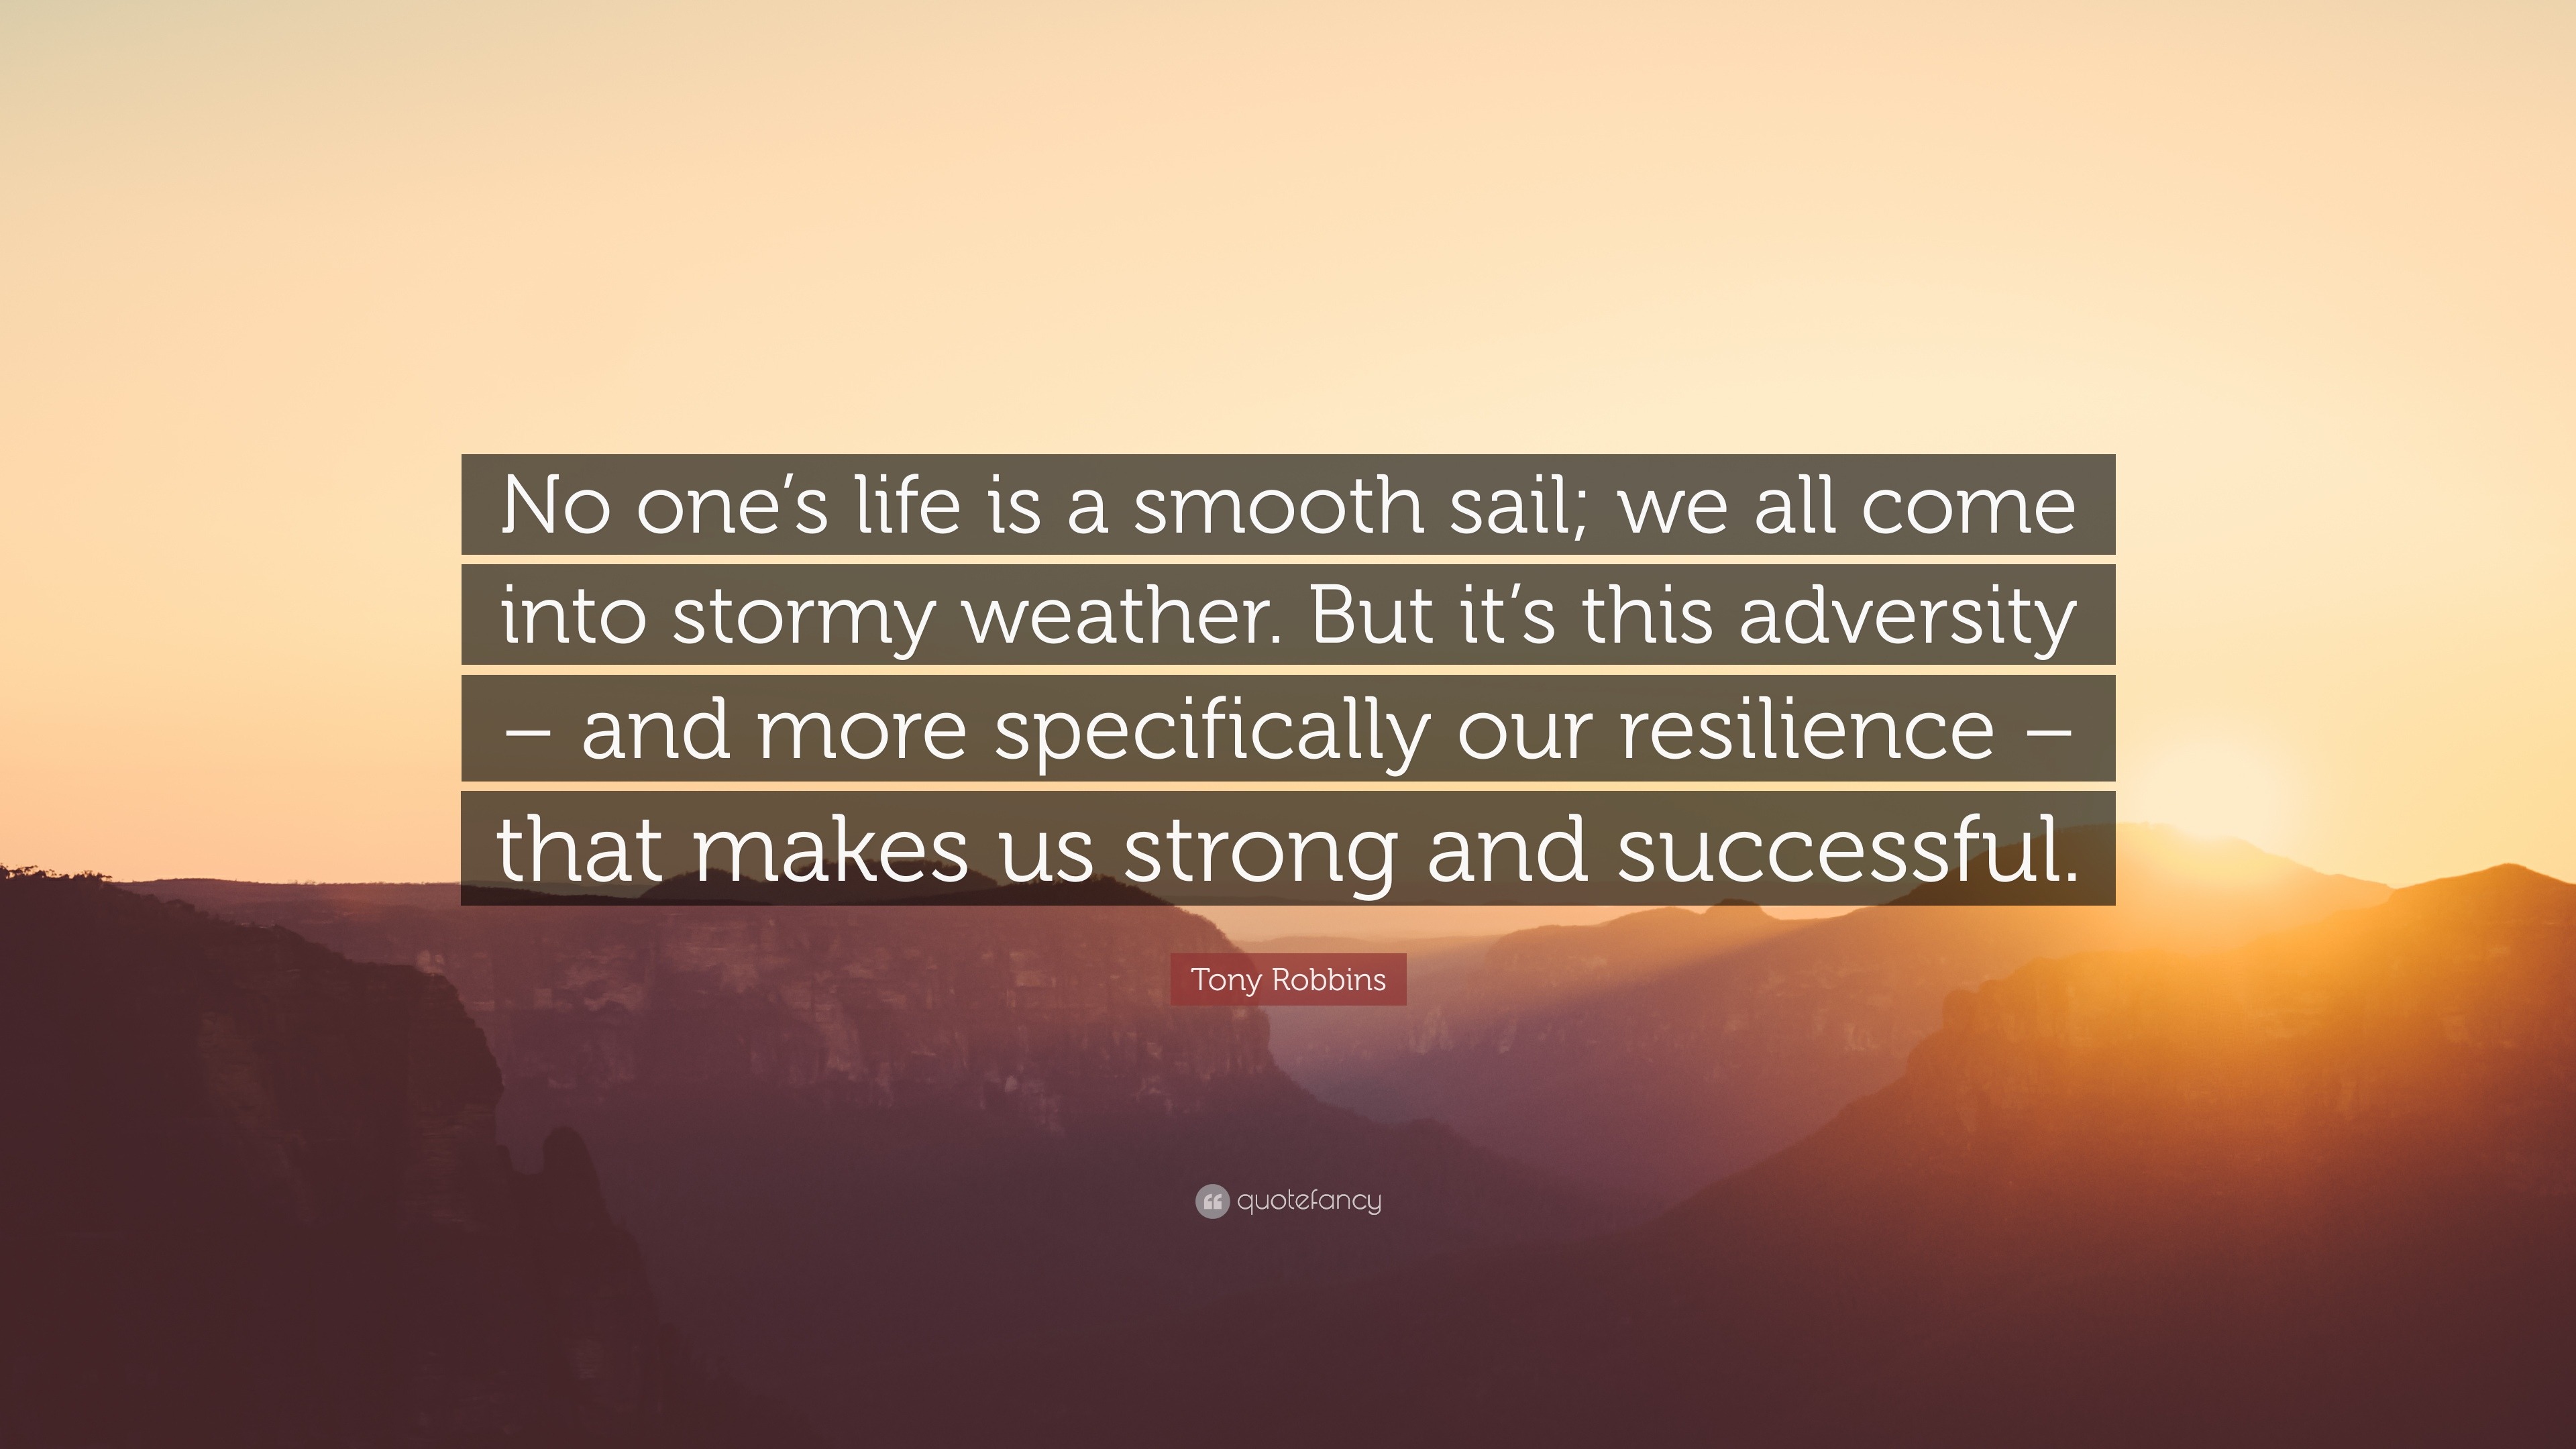 Tony Robbins Quote: “No one's life is a smooth sail; we all come